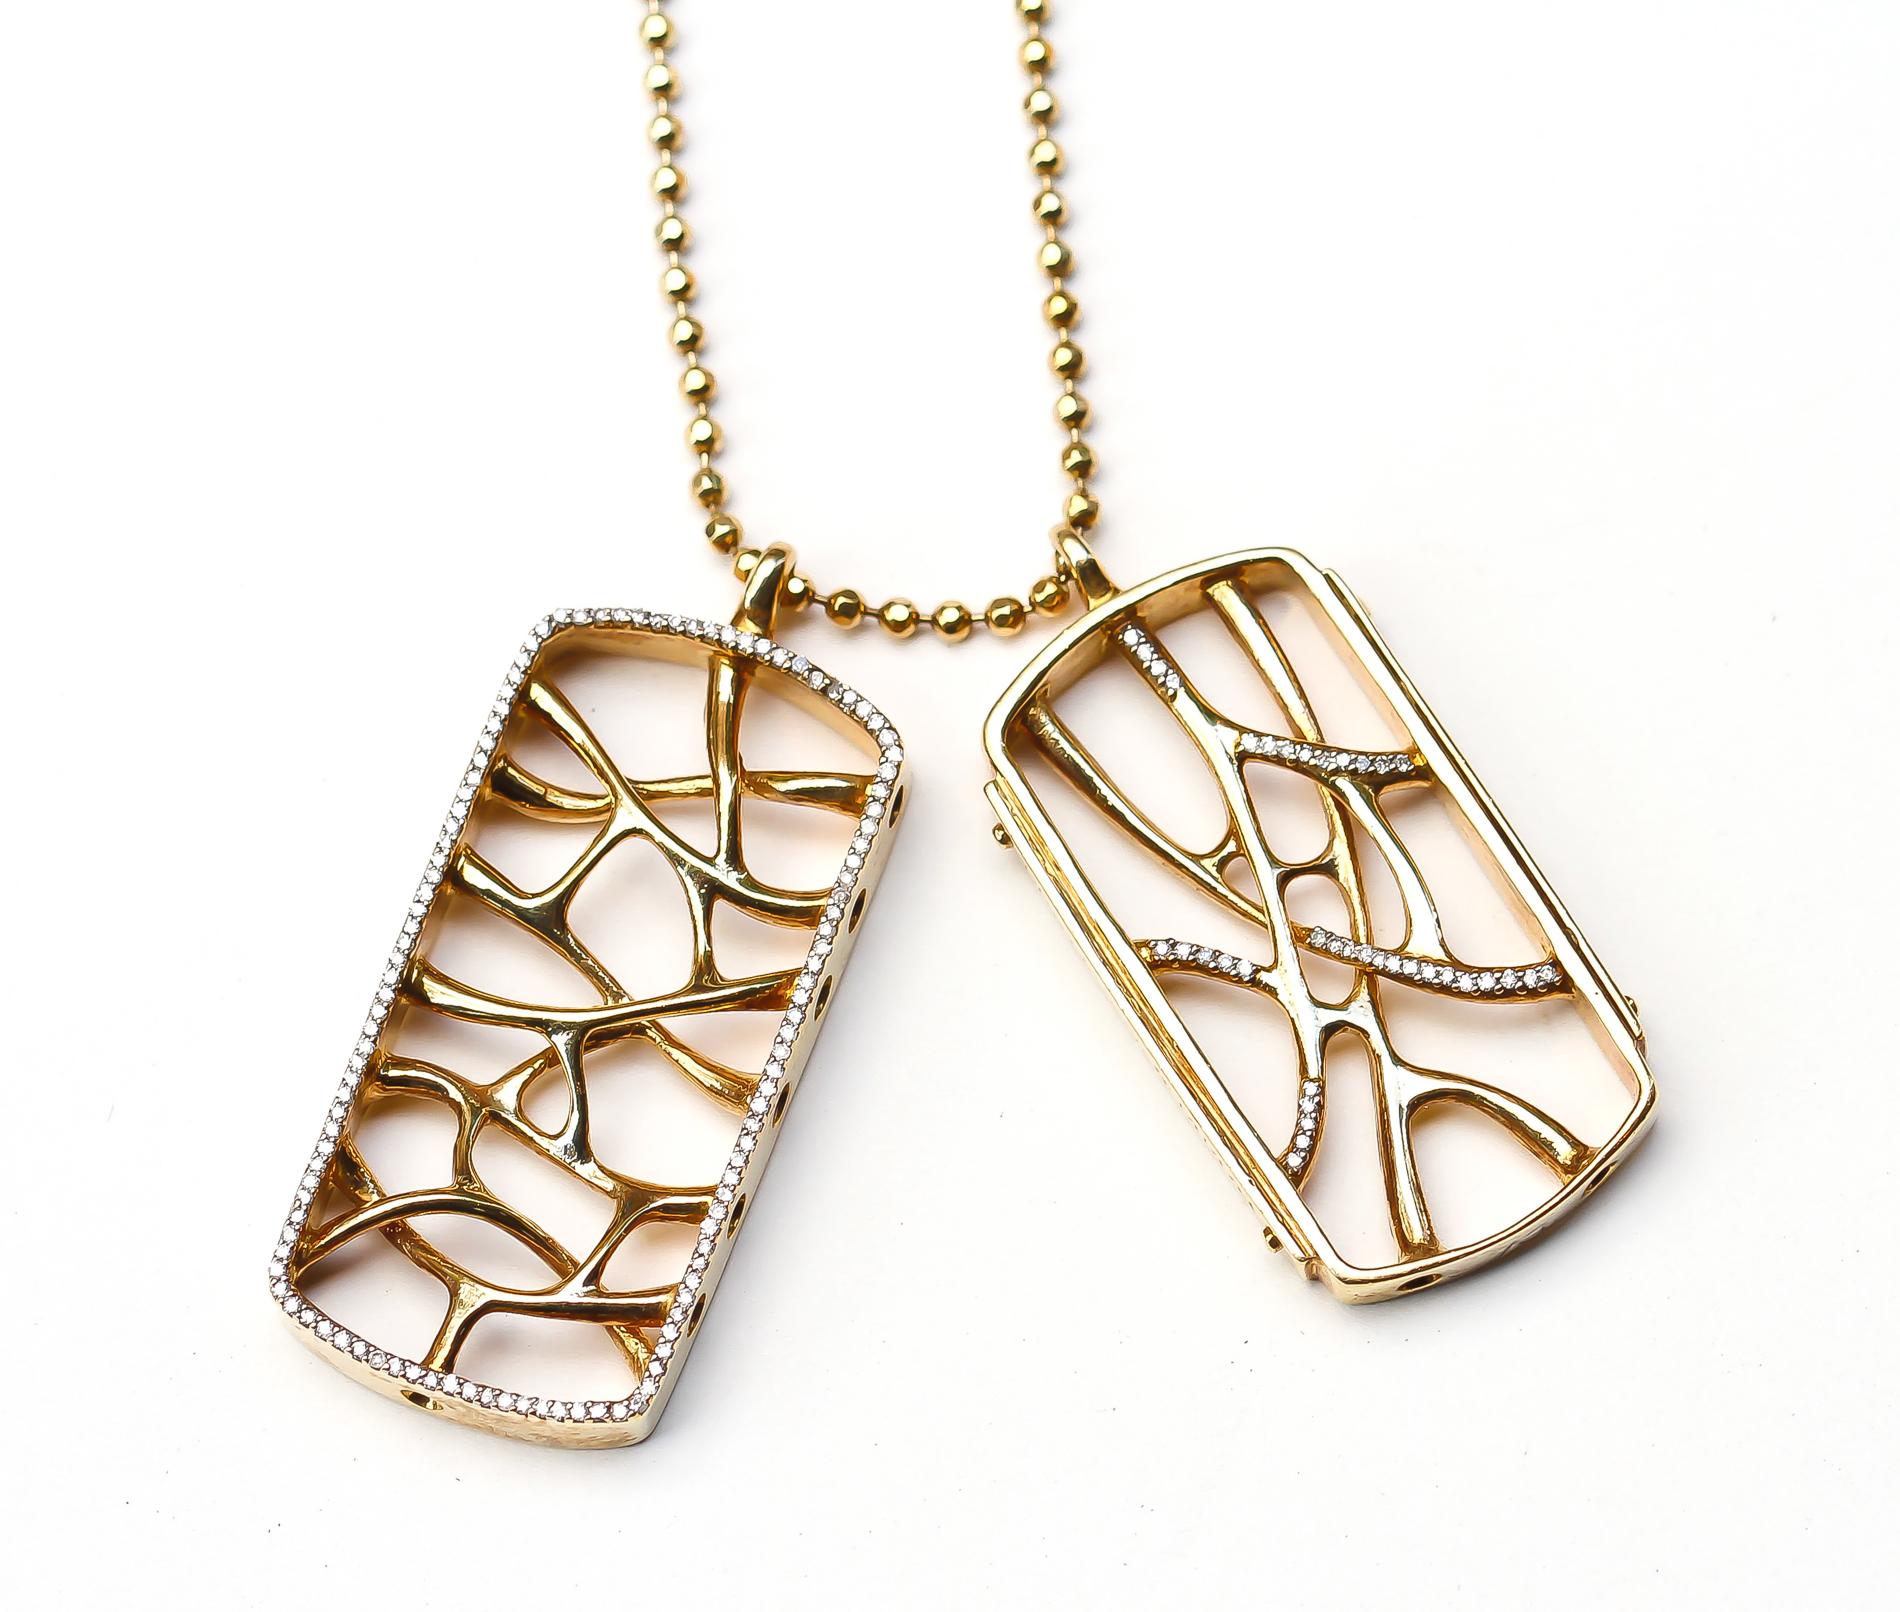 This 18K Gold Web Dog Tag Necklace is inspired by the fractal and natural root systems. This dog tag set is a limited edition series of ten by John Brevard. This intricately crafted, limited edition ring features morphogenic patterns and is part of